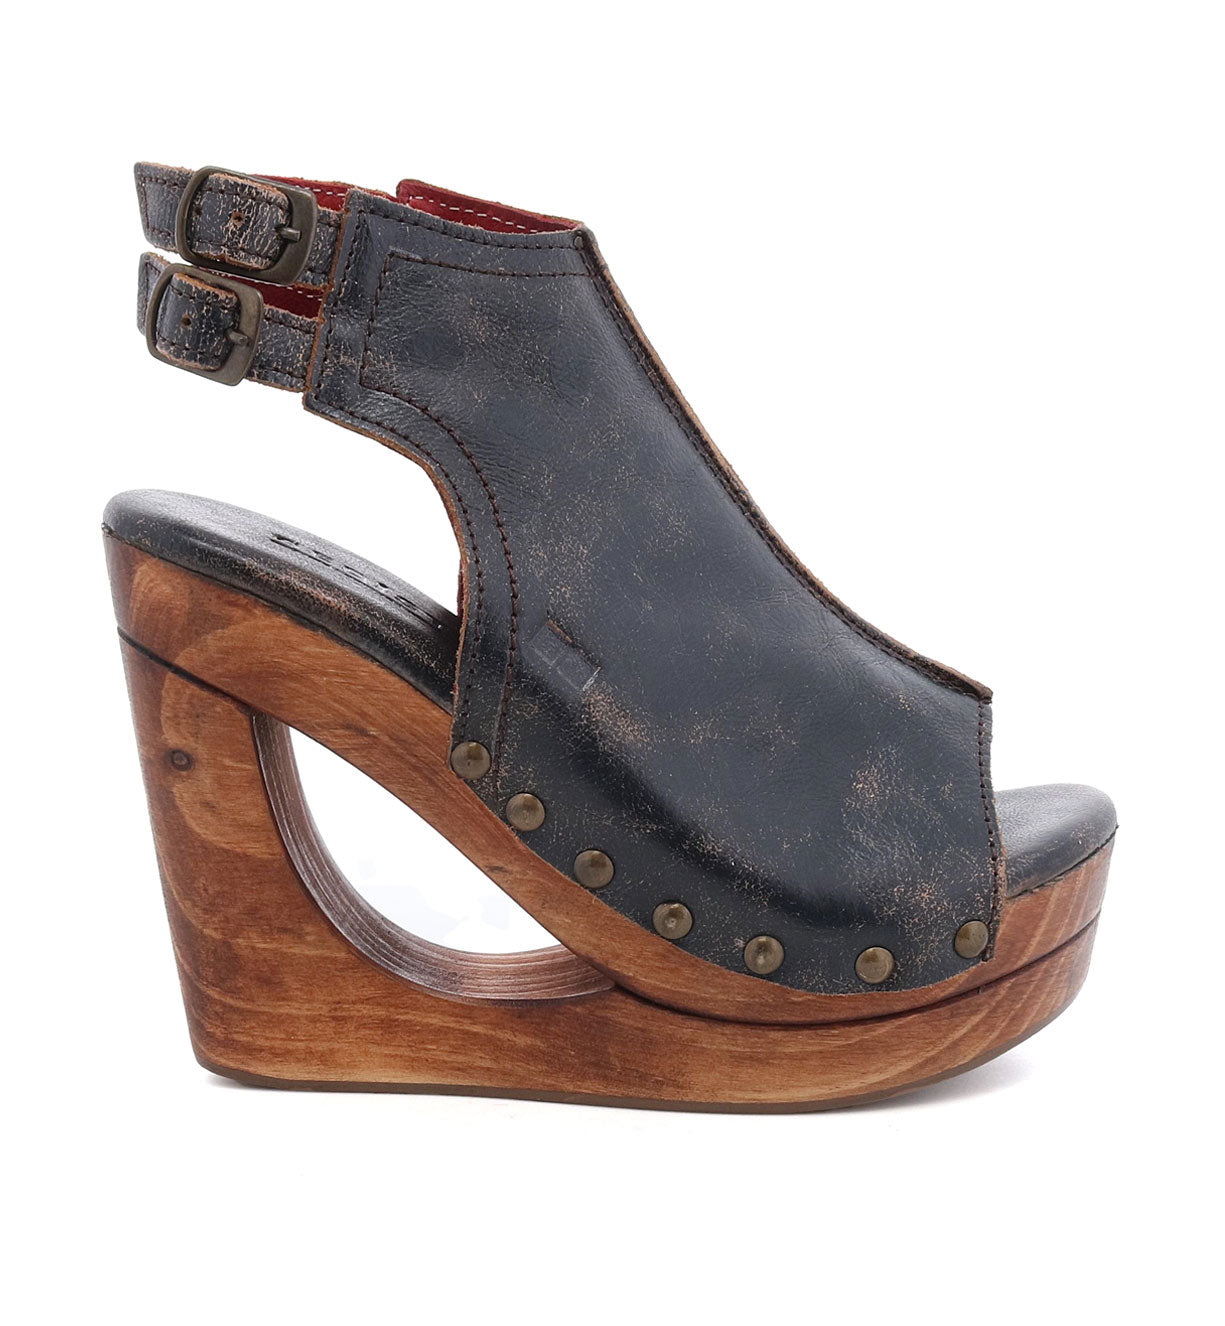 An Imelda sandal with a wooden platform, made by Bed Stu.